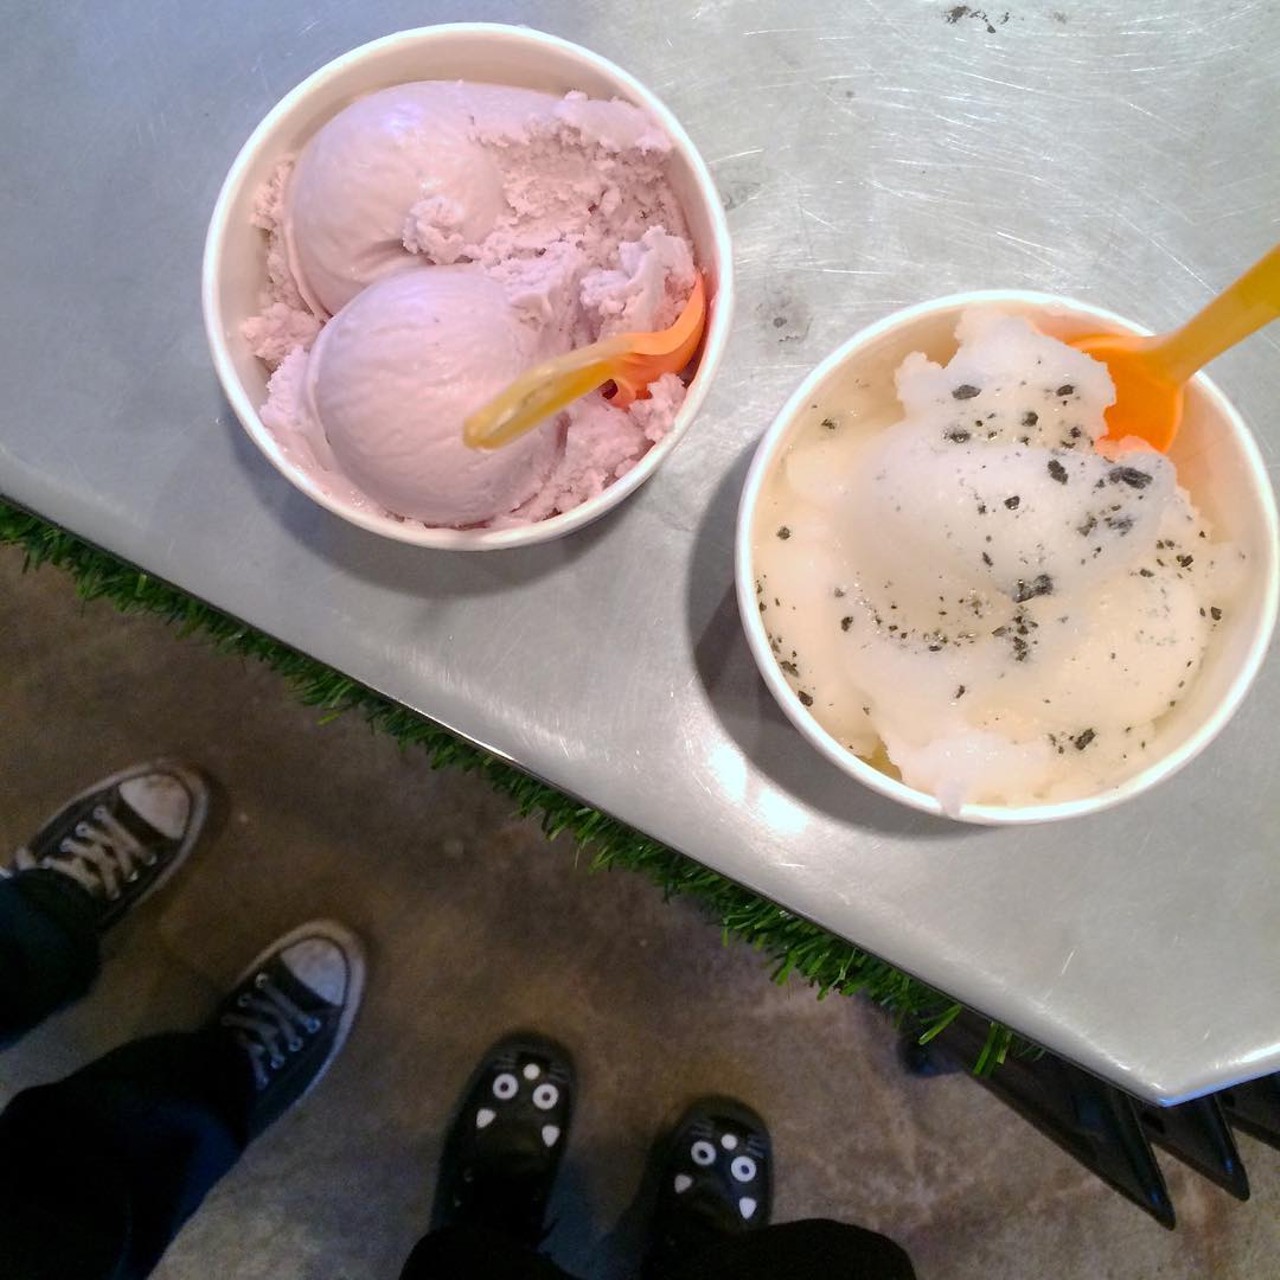 Blueberries and Cream on the left. Margarita with Black Salt on the right. #cleicecream #thisiscle